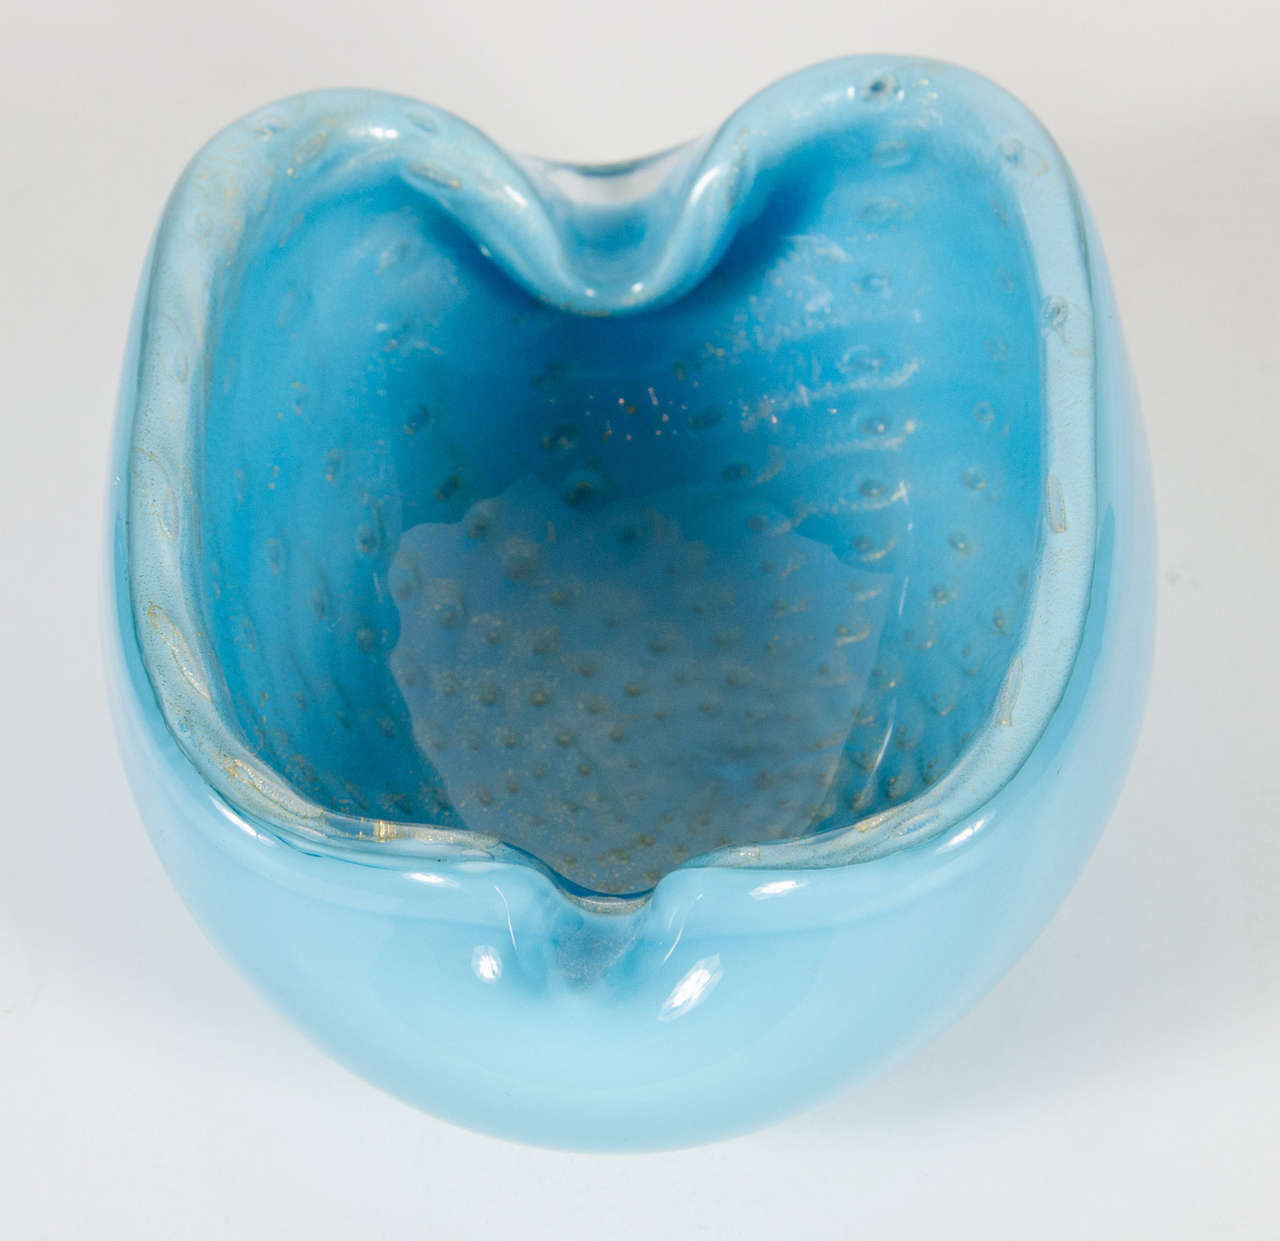 Exquisite hand blown Murano glass bowl in a robins egg blue with an ovoid shape.  It has a polished design on the outside while the inside is speckled with 24K gold flecks in a starburst pattern.